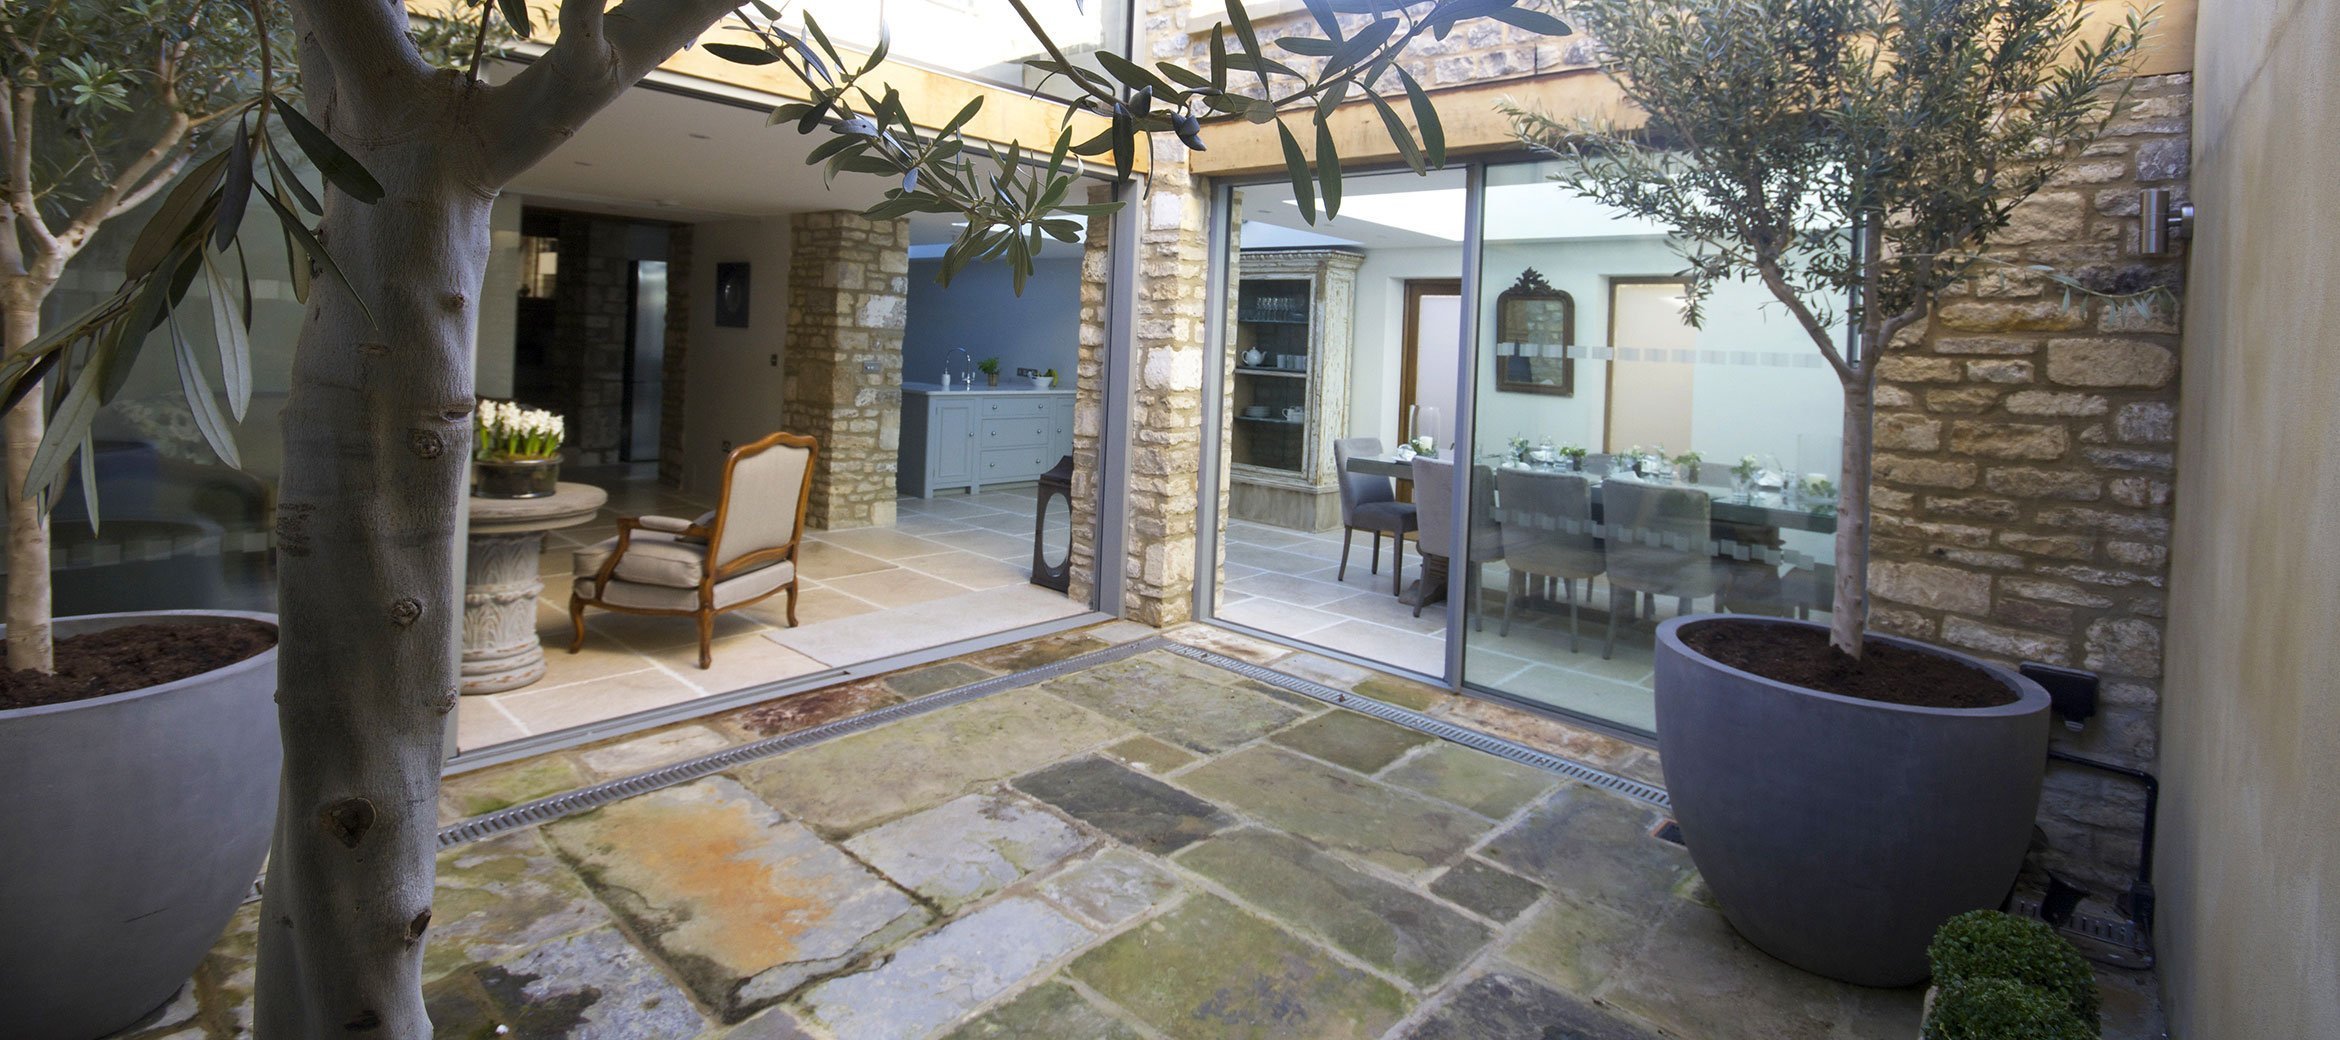 Stunning Cotswold Cottage Courtyard Full Home Tour over on Modern Country Style